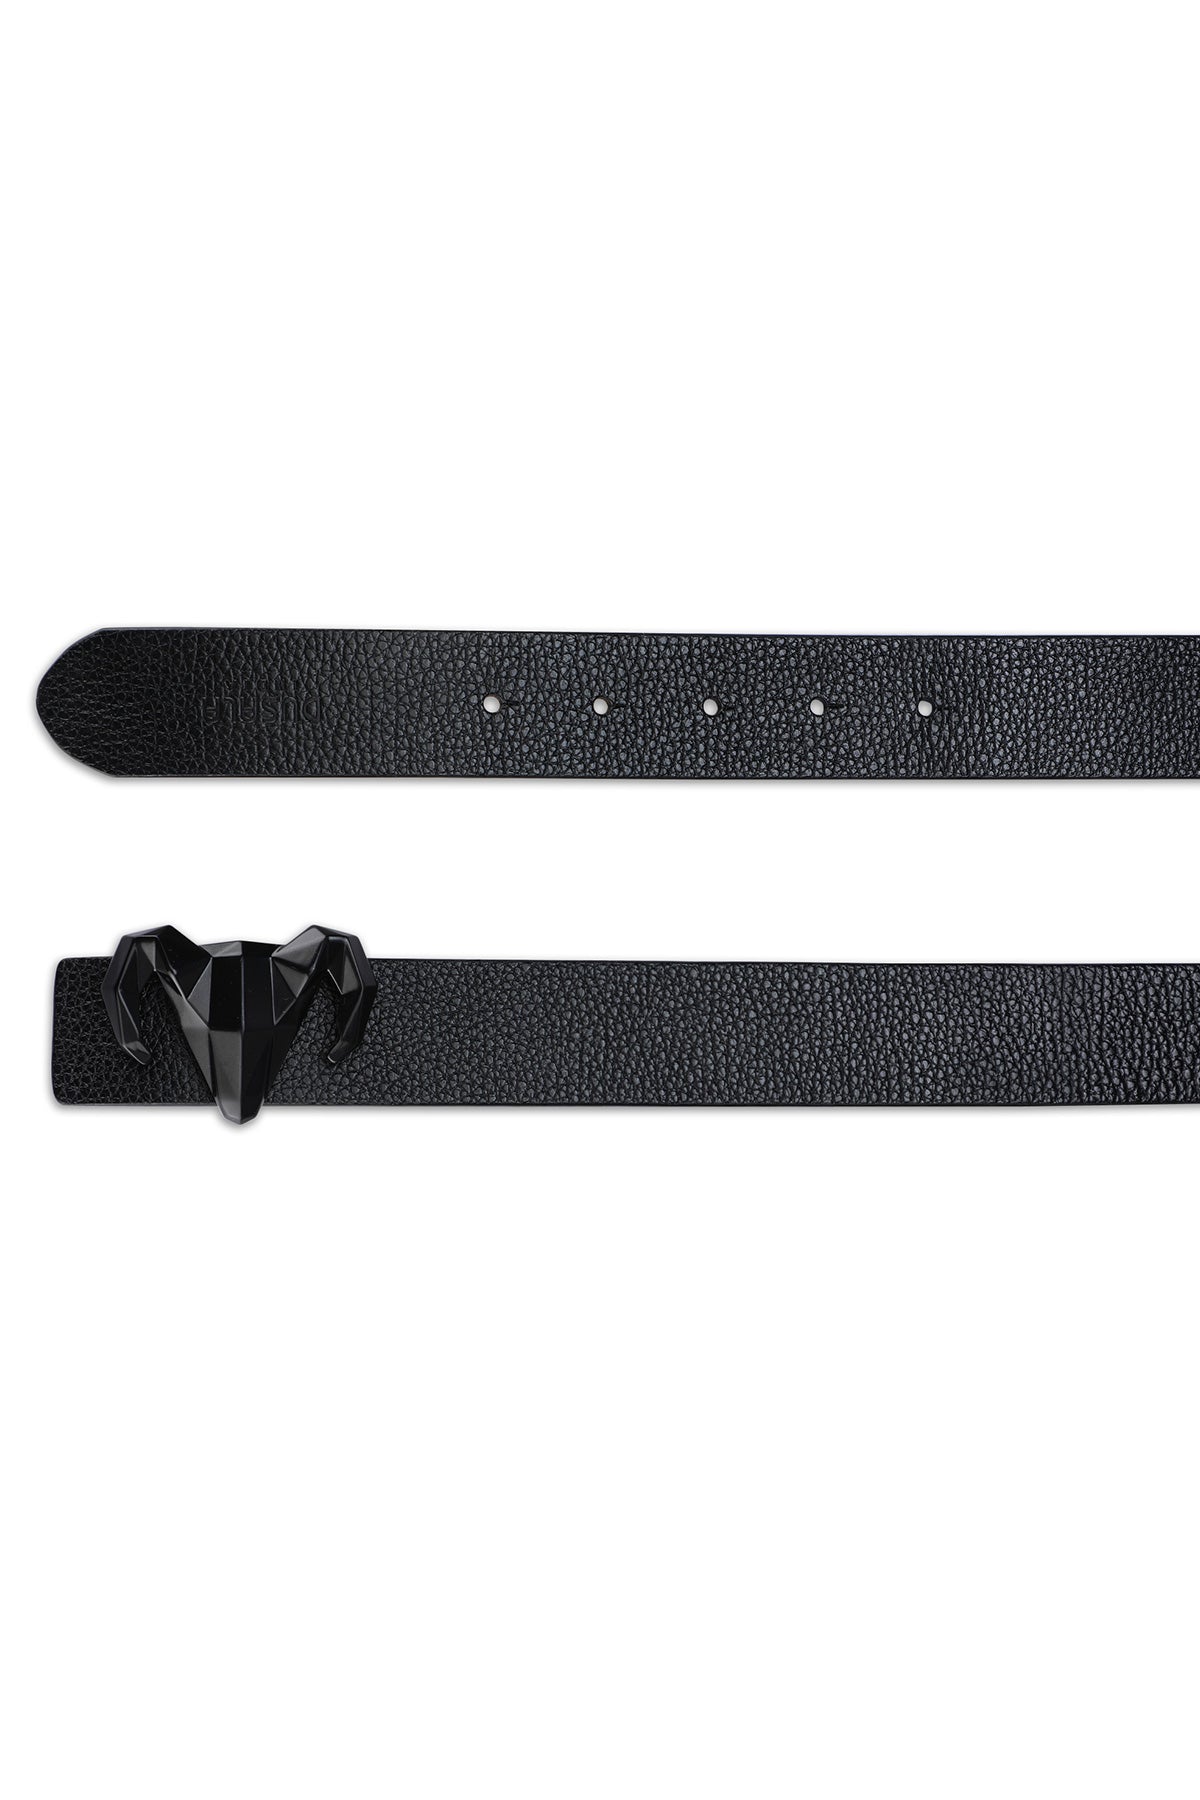 Italian Leather Ram Buckle Reversible Belt – Gold and Black